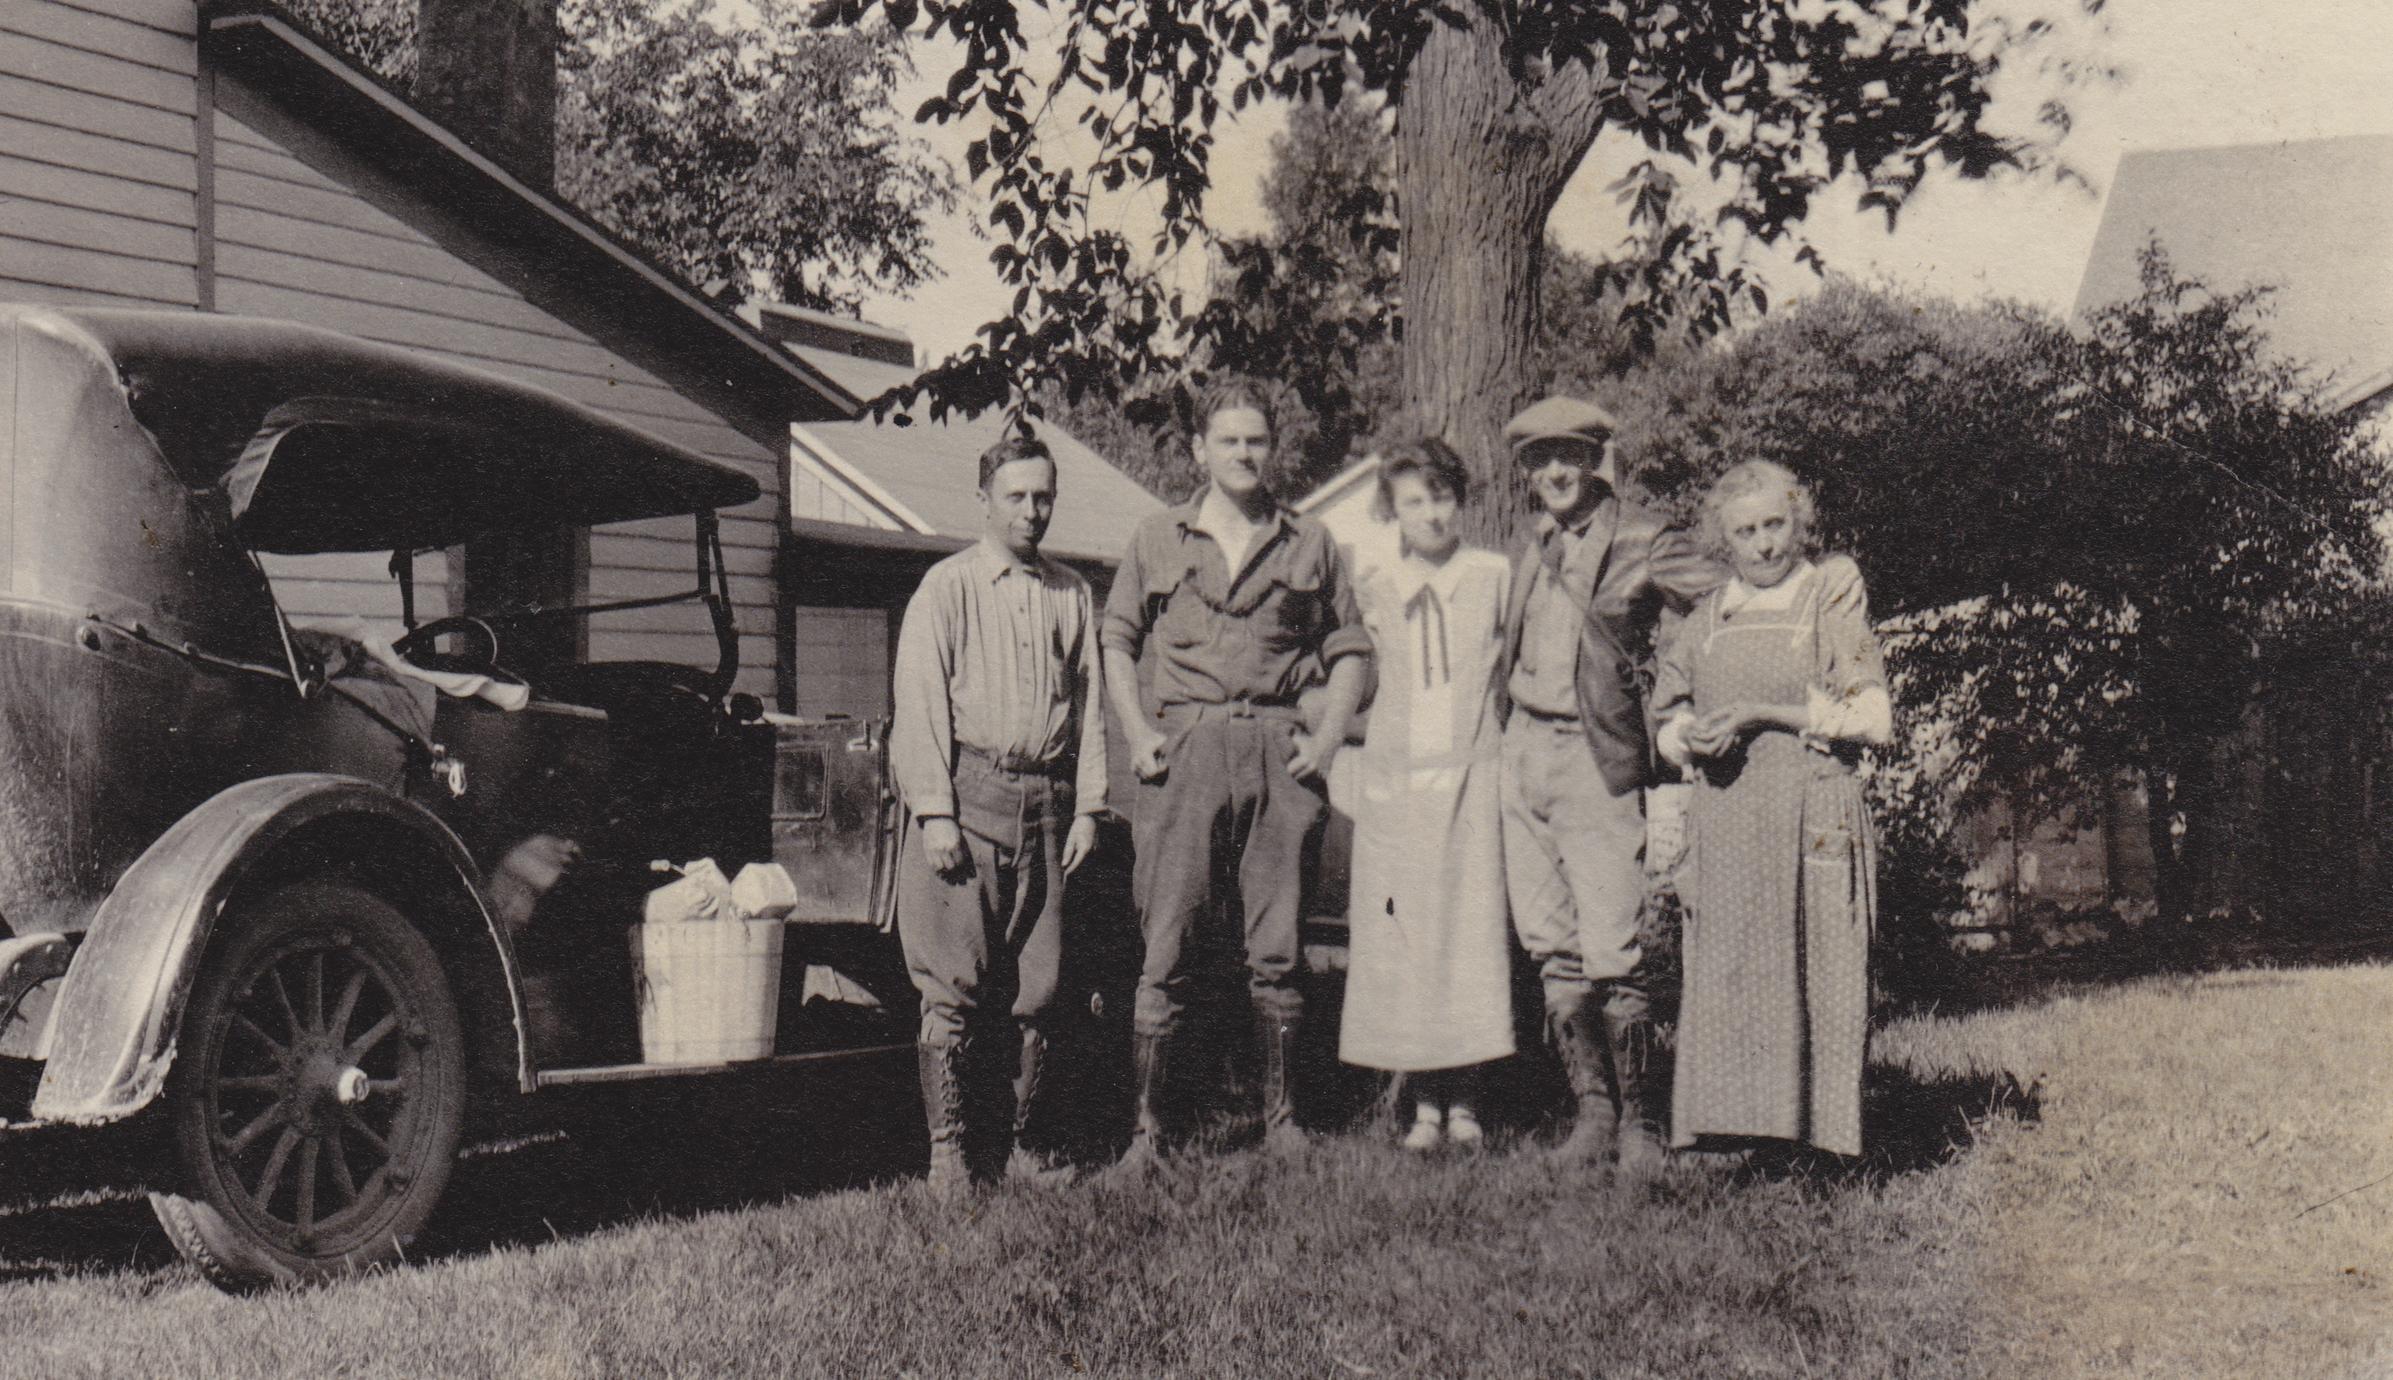 Visting Leicht's family in New Lisbon, WI